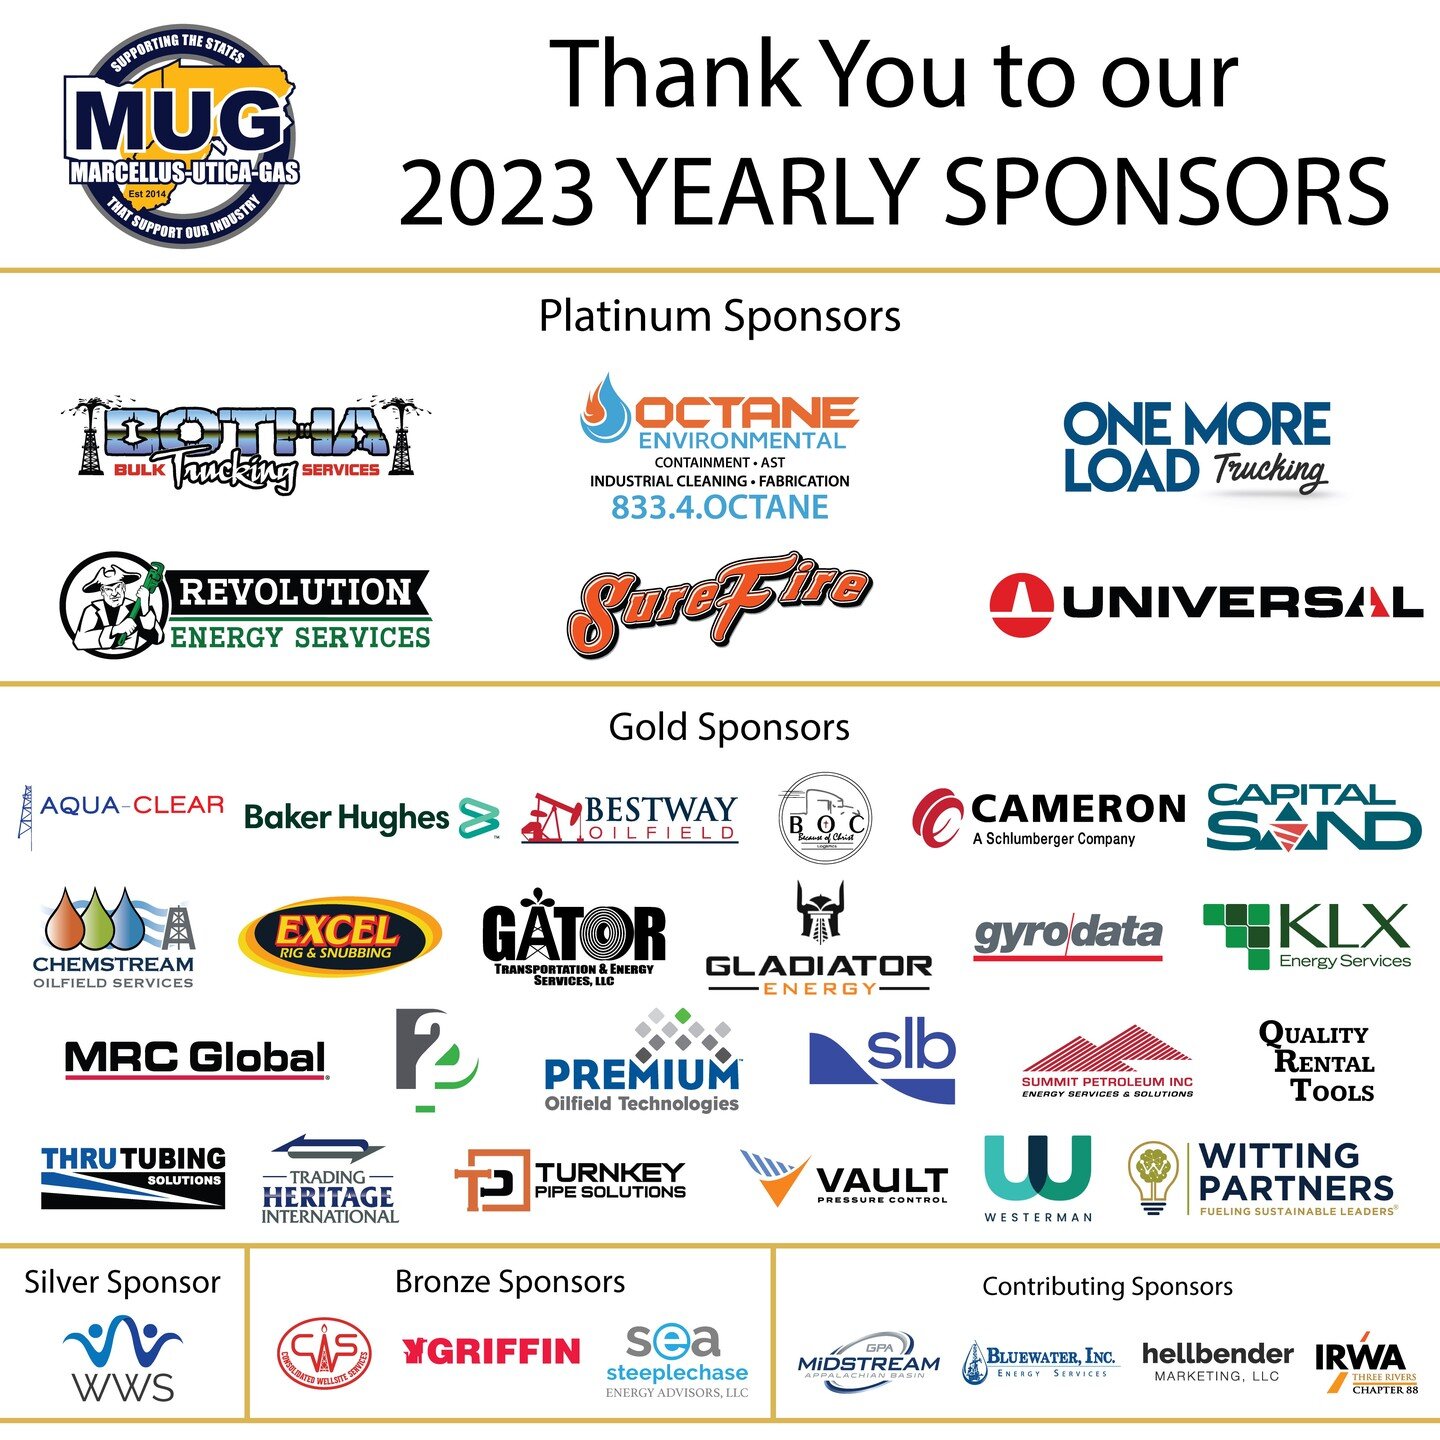 Our 2023 Yearly Sponsorships are in the books. Thank you to all of the companies and their generosity. We're excited to hit the ground running with our Happy Hours and Golf Scramble and give back to the communities we work and live in! #MUG #OilAndGa